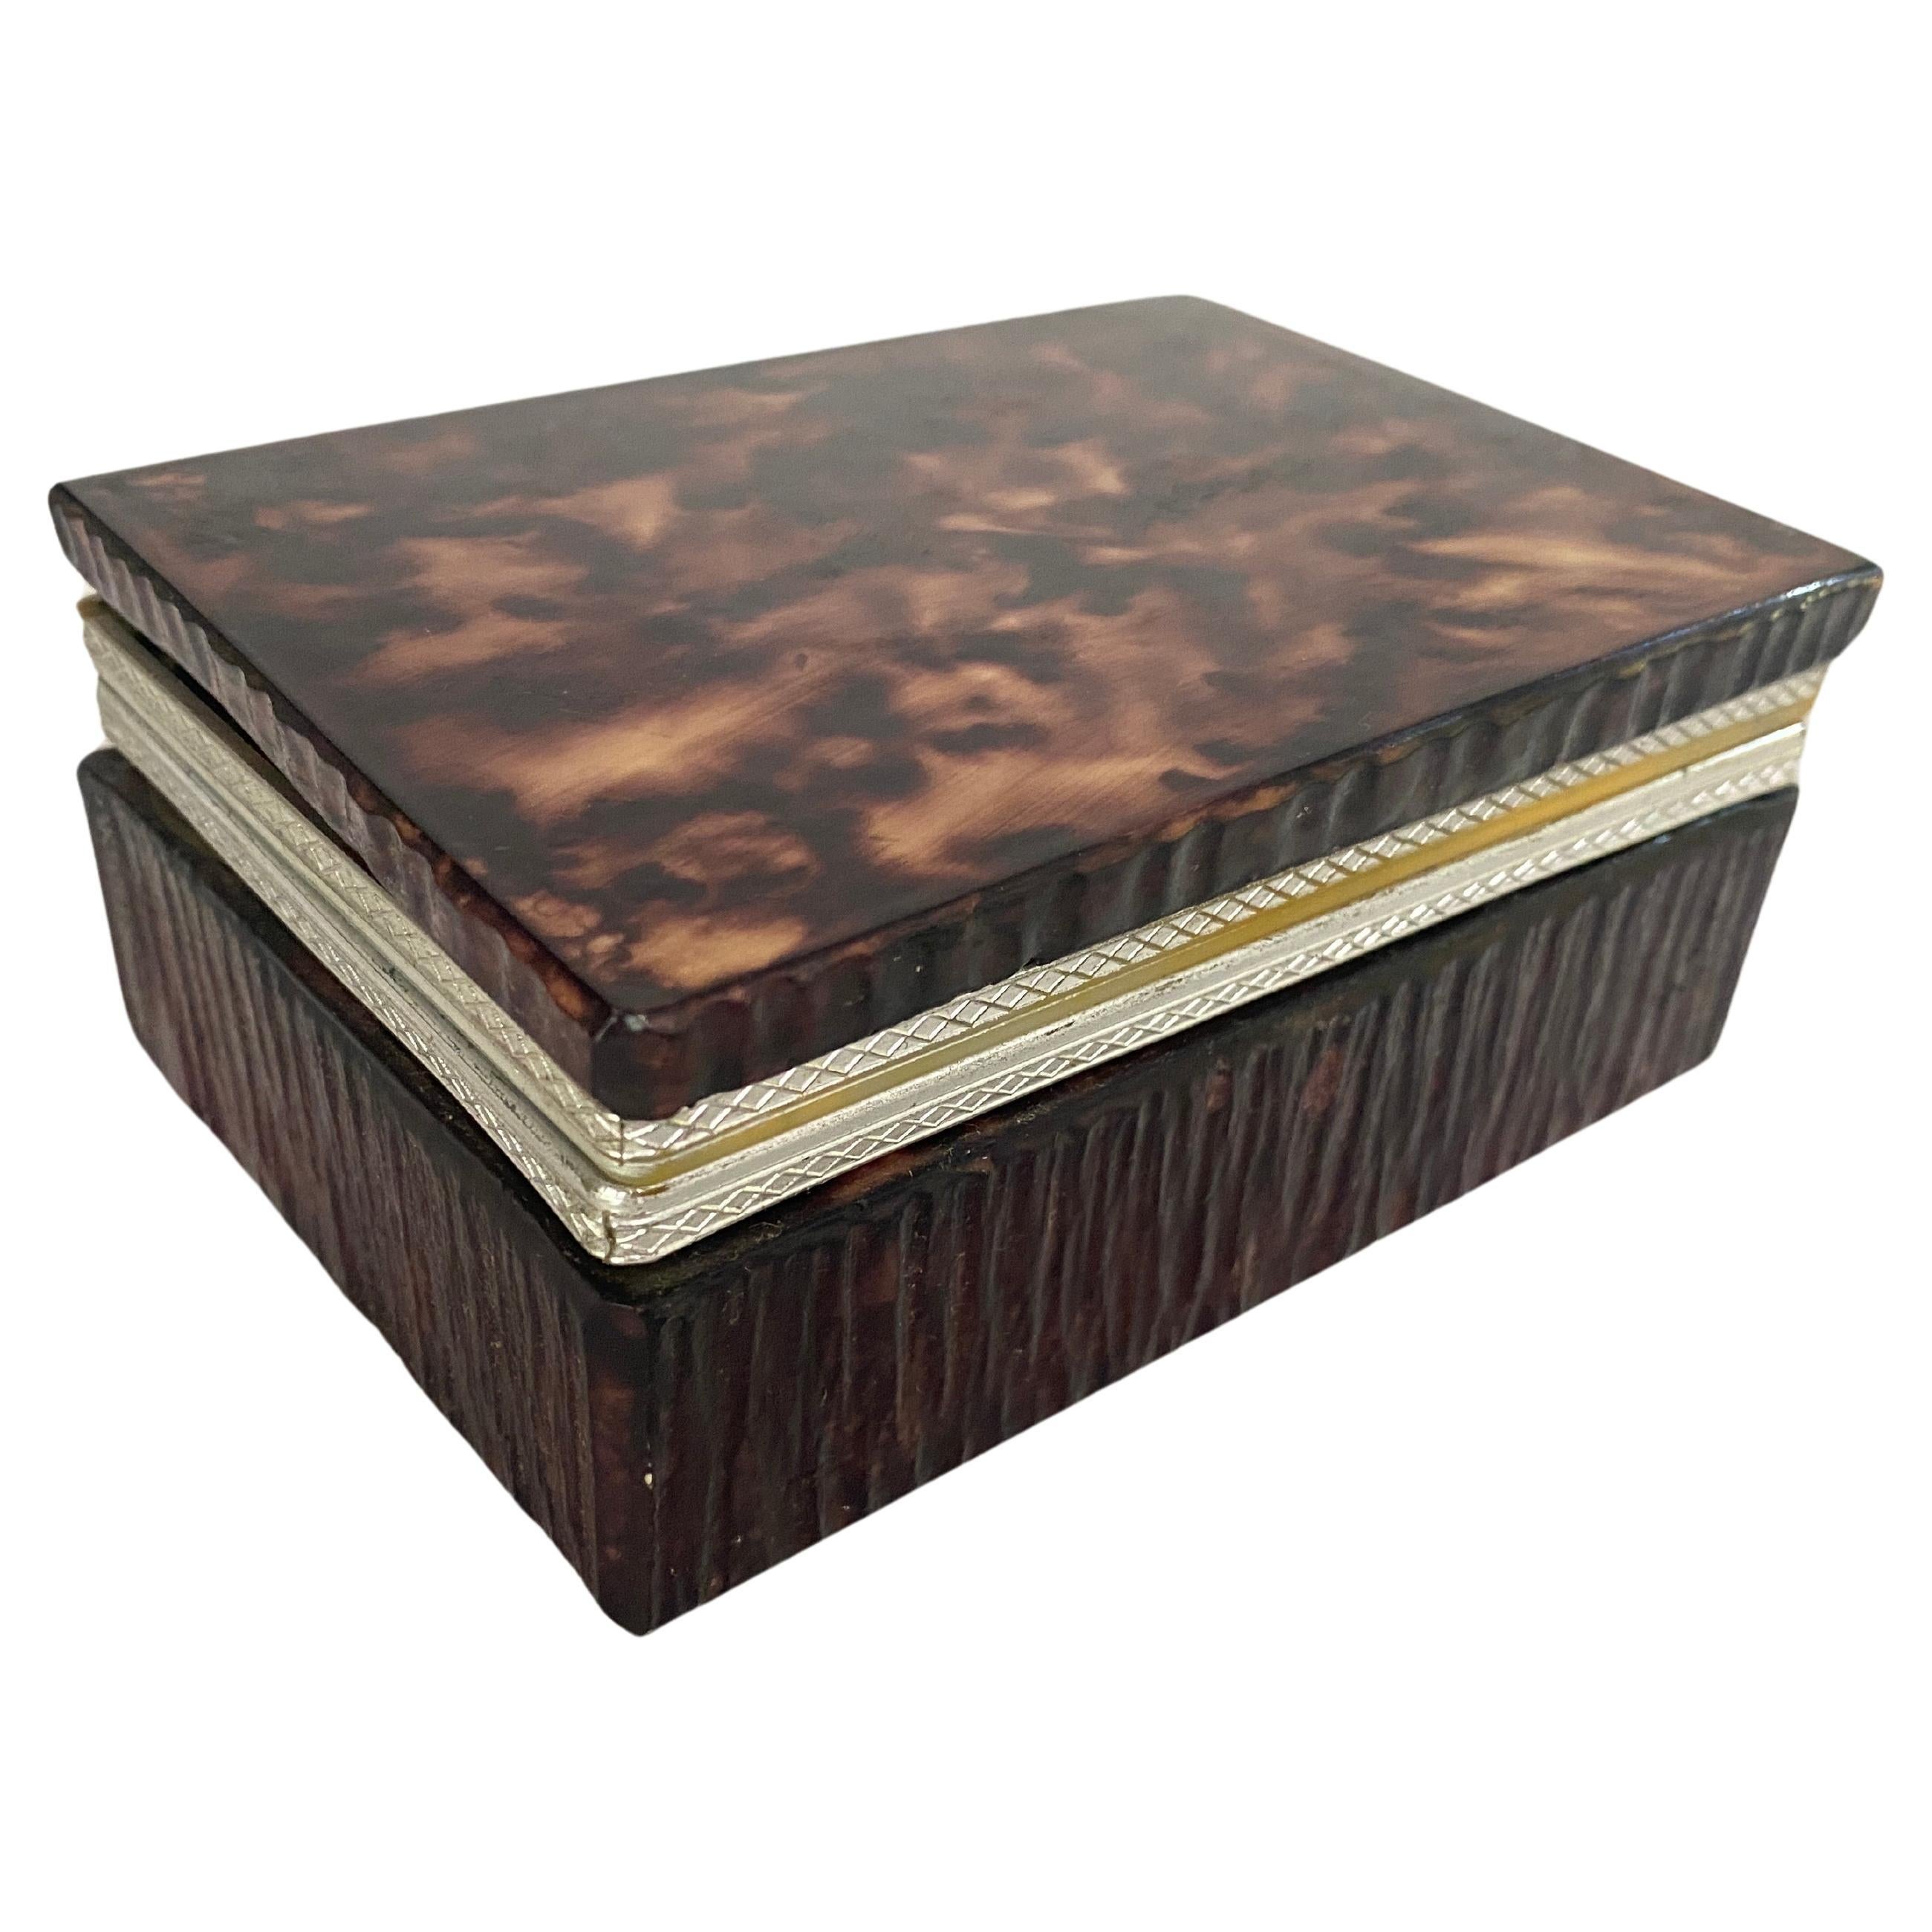 Onyx Box Decorative or Jewelry Box Brown Color Made in Italy circa 1970 For Sale